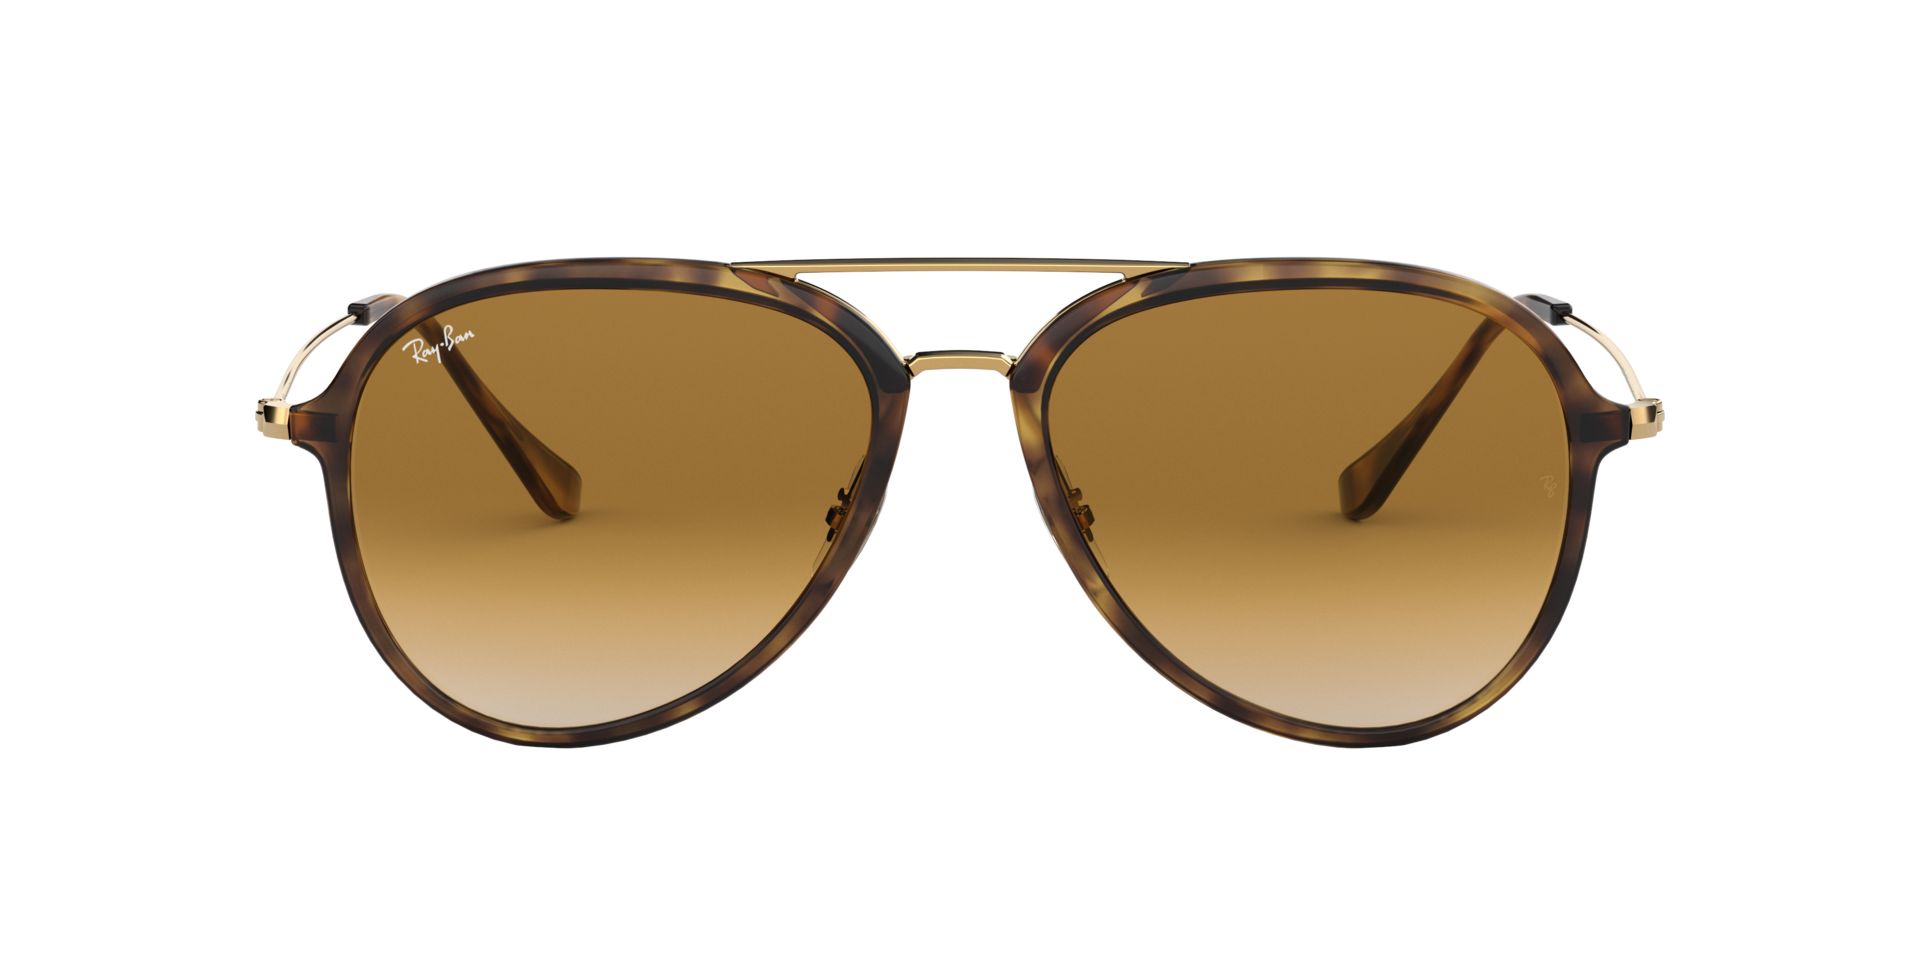 Buy Ray-Ban Rb4298 Sunglasses Online.